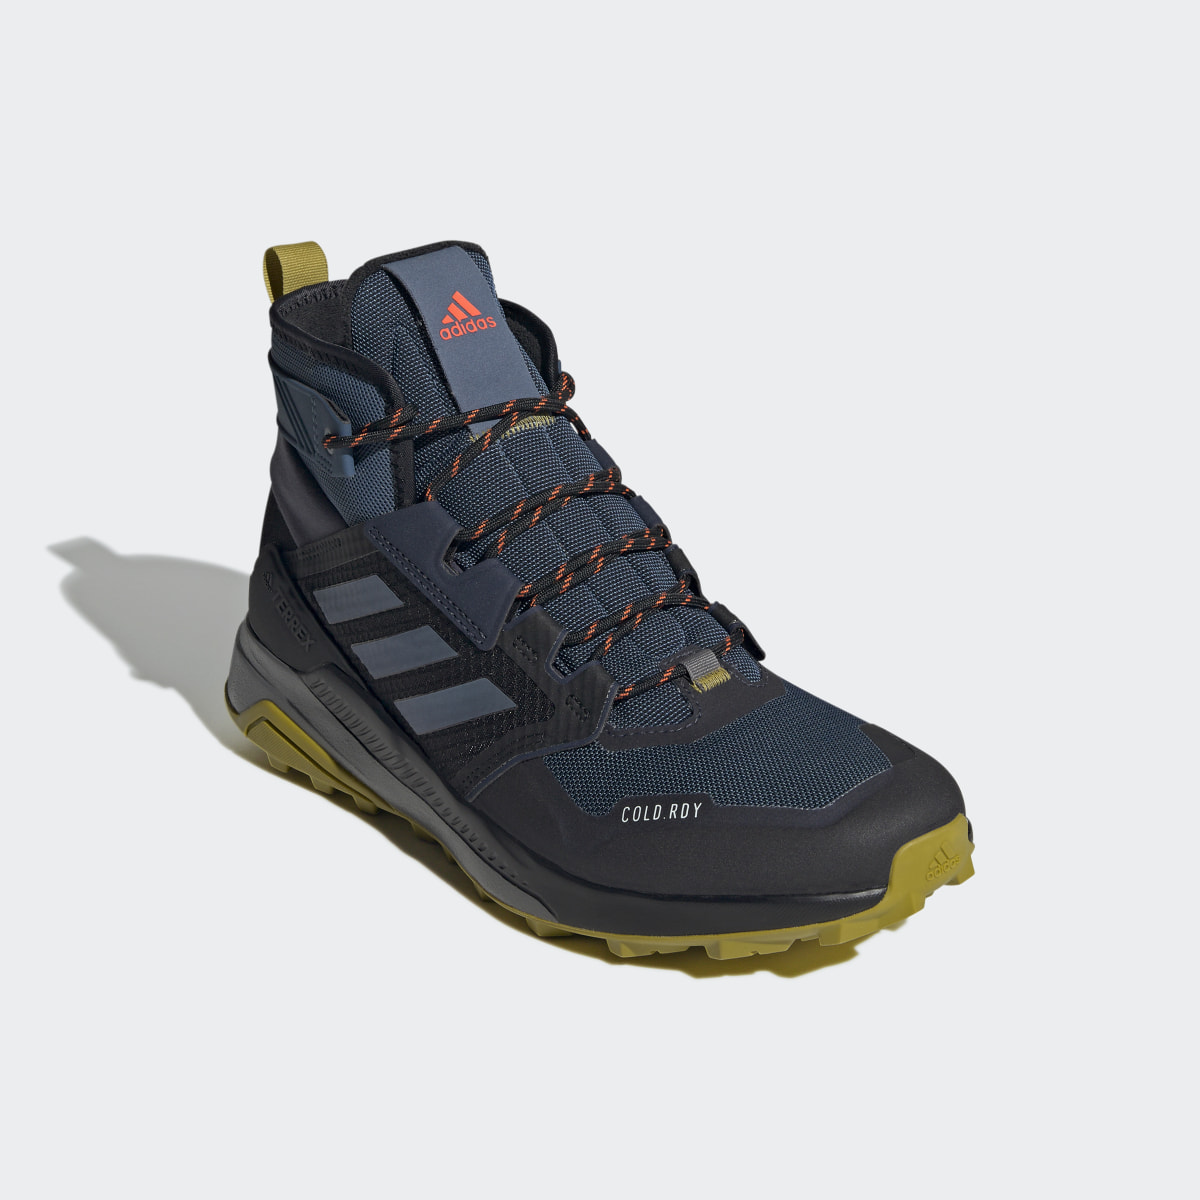 Adidas Terrex Trailmaker Mid COLD.RDY Hiking Boots. 5